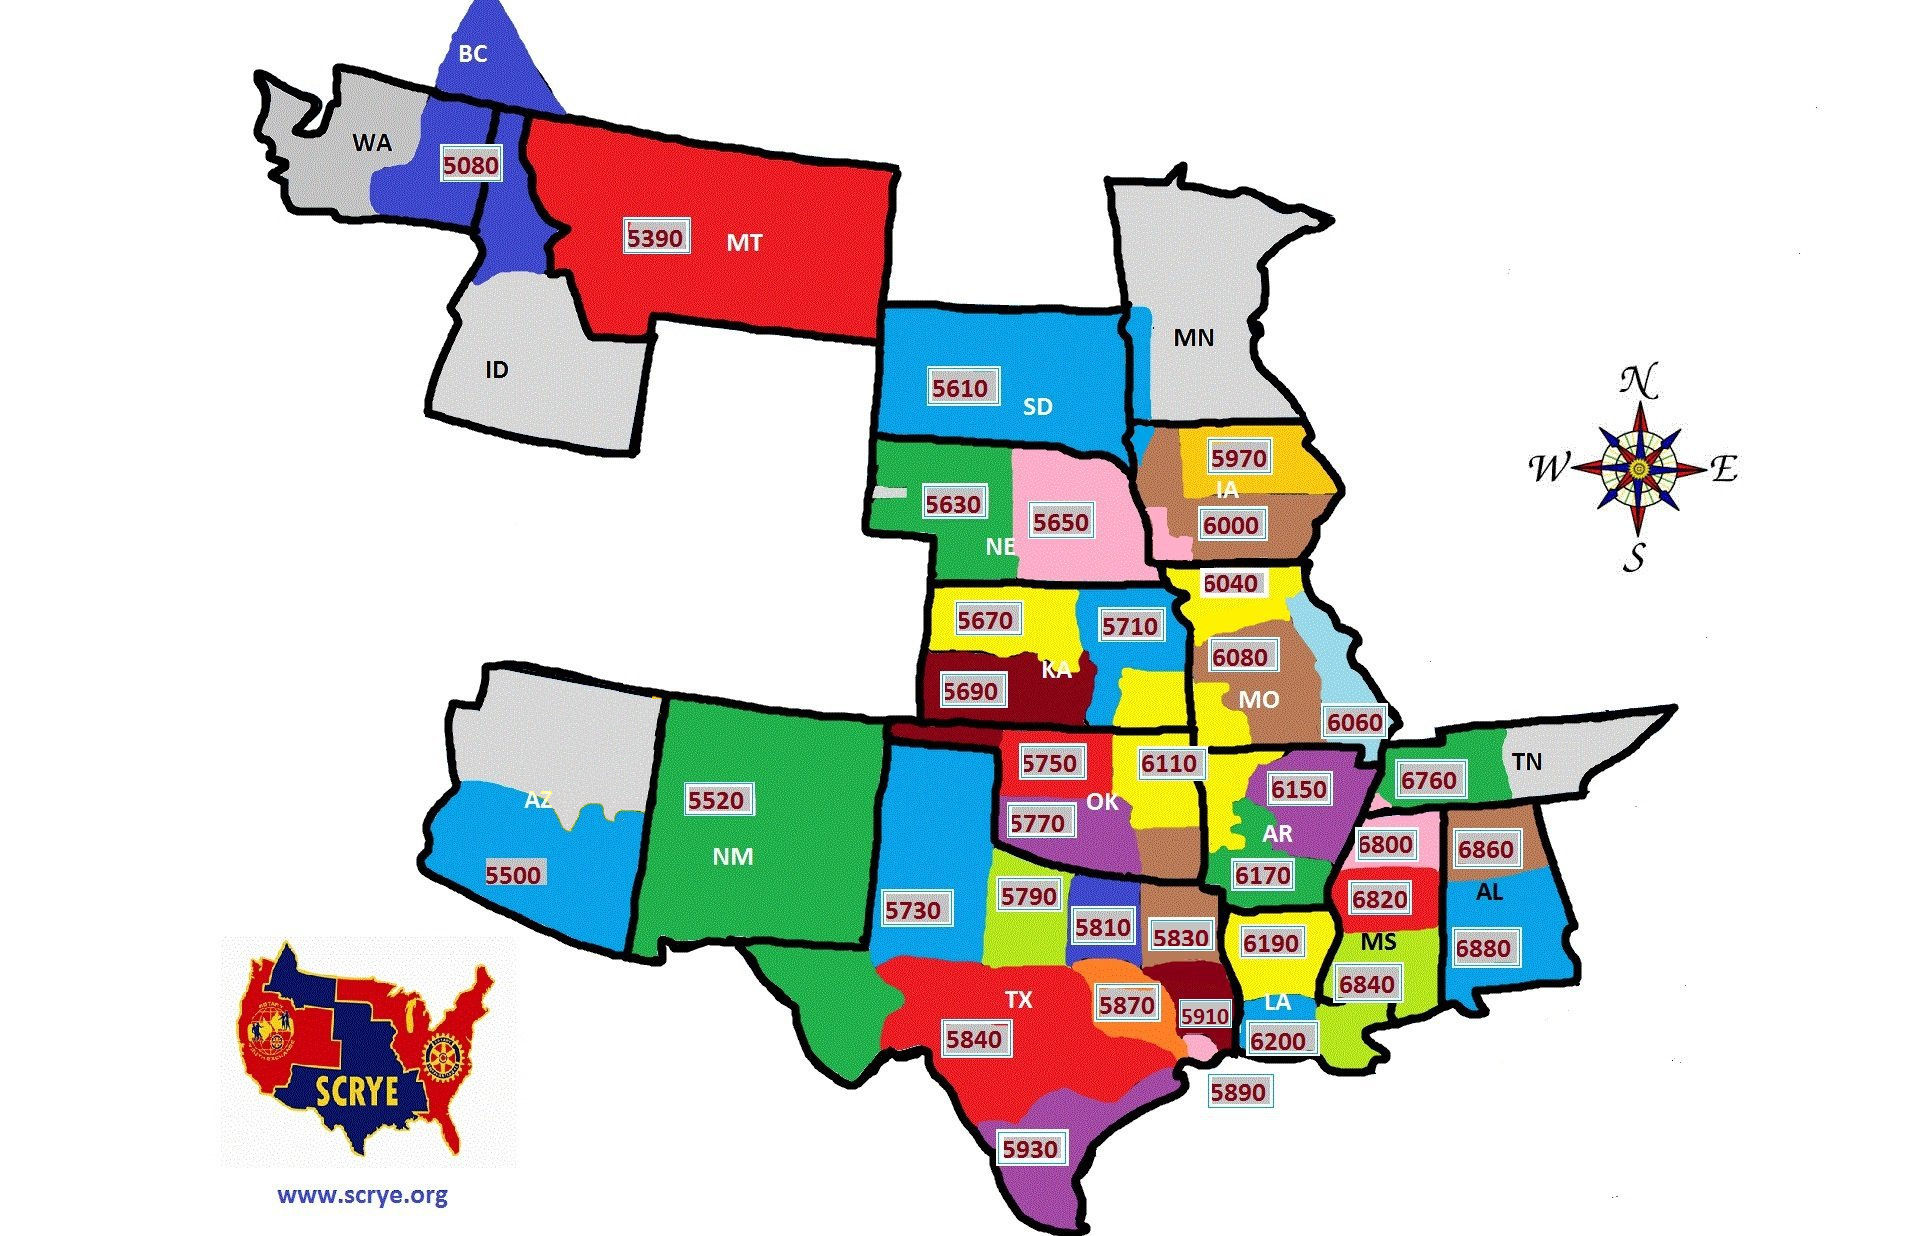 District 5630 Clubs map